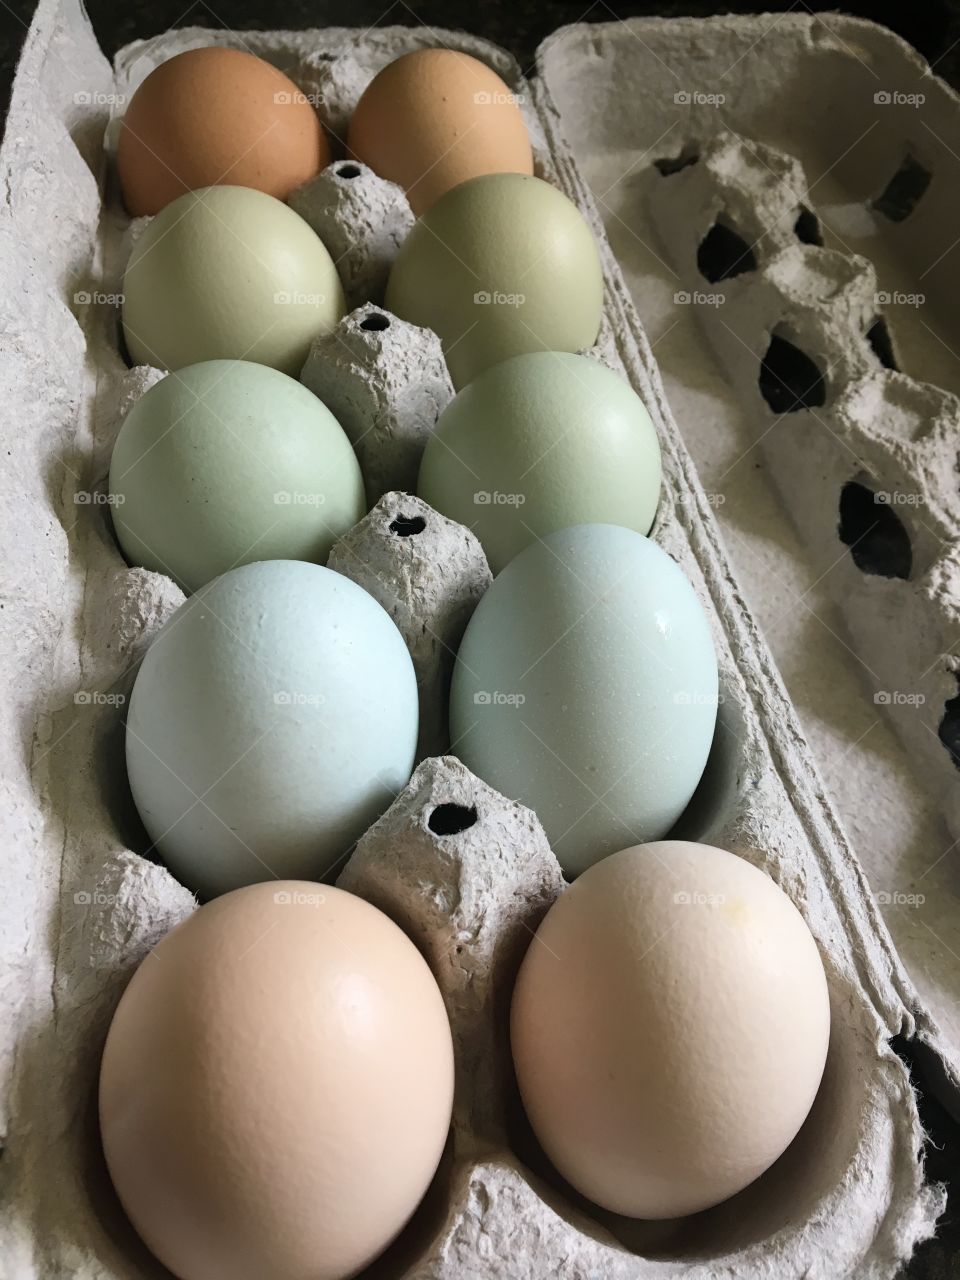 A carton of organic eggs sorted in pairs by colour from pale beige to blue, mint green, olive and brown. 